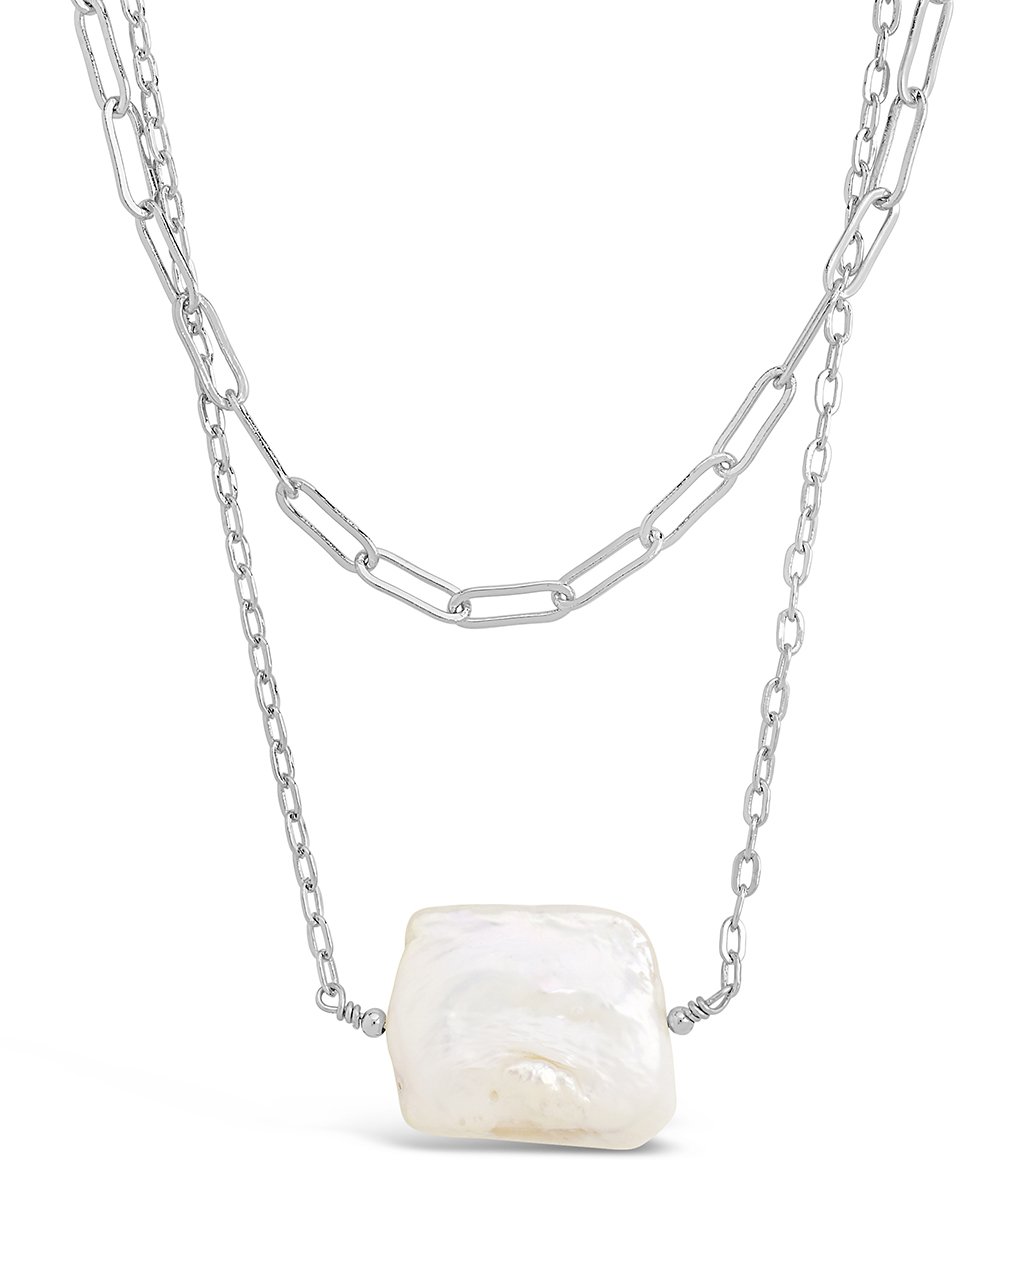 Chain Link and Pearl Layered Necklace by Sterling Forever